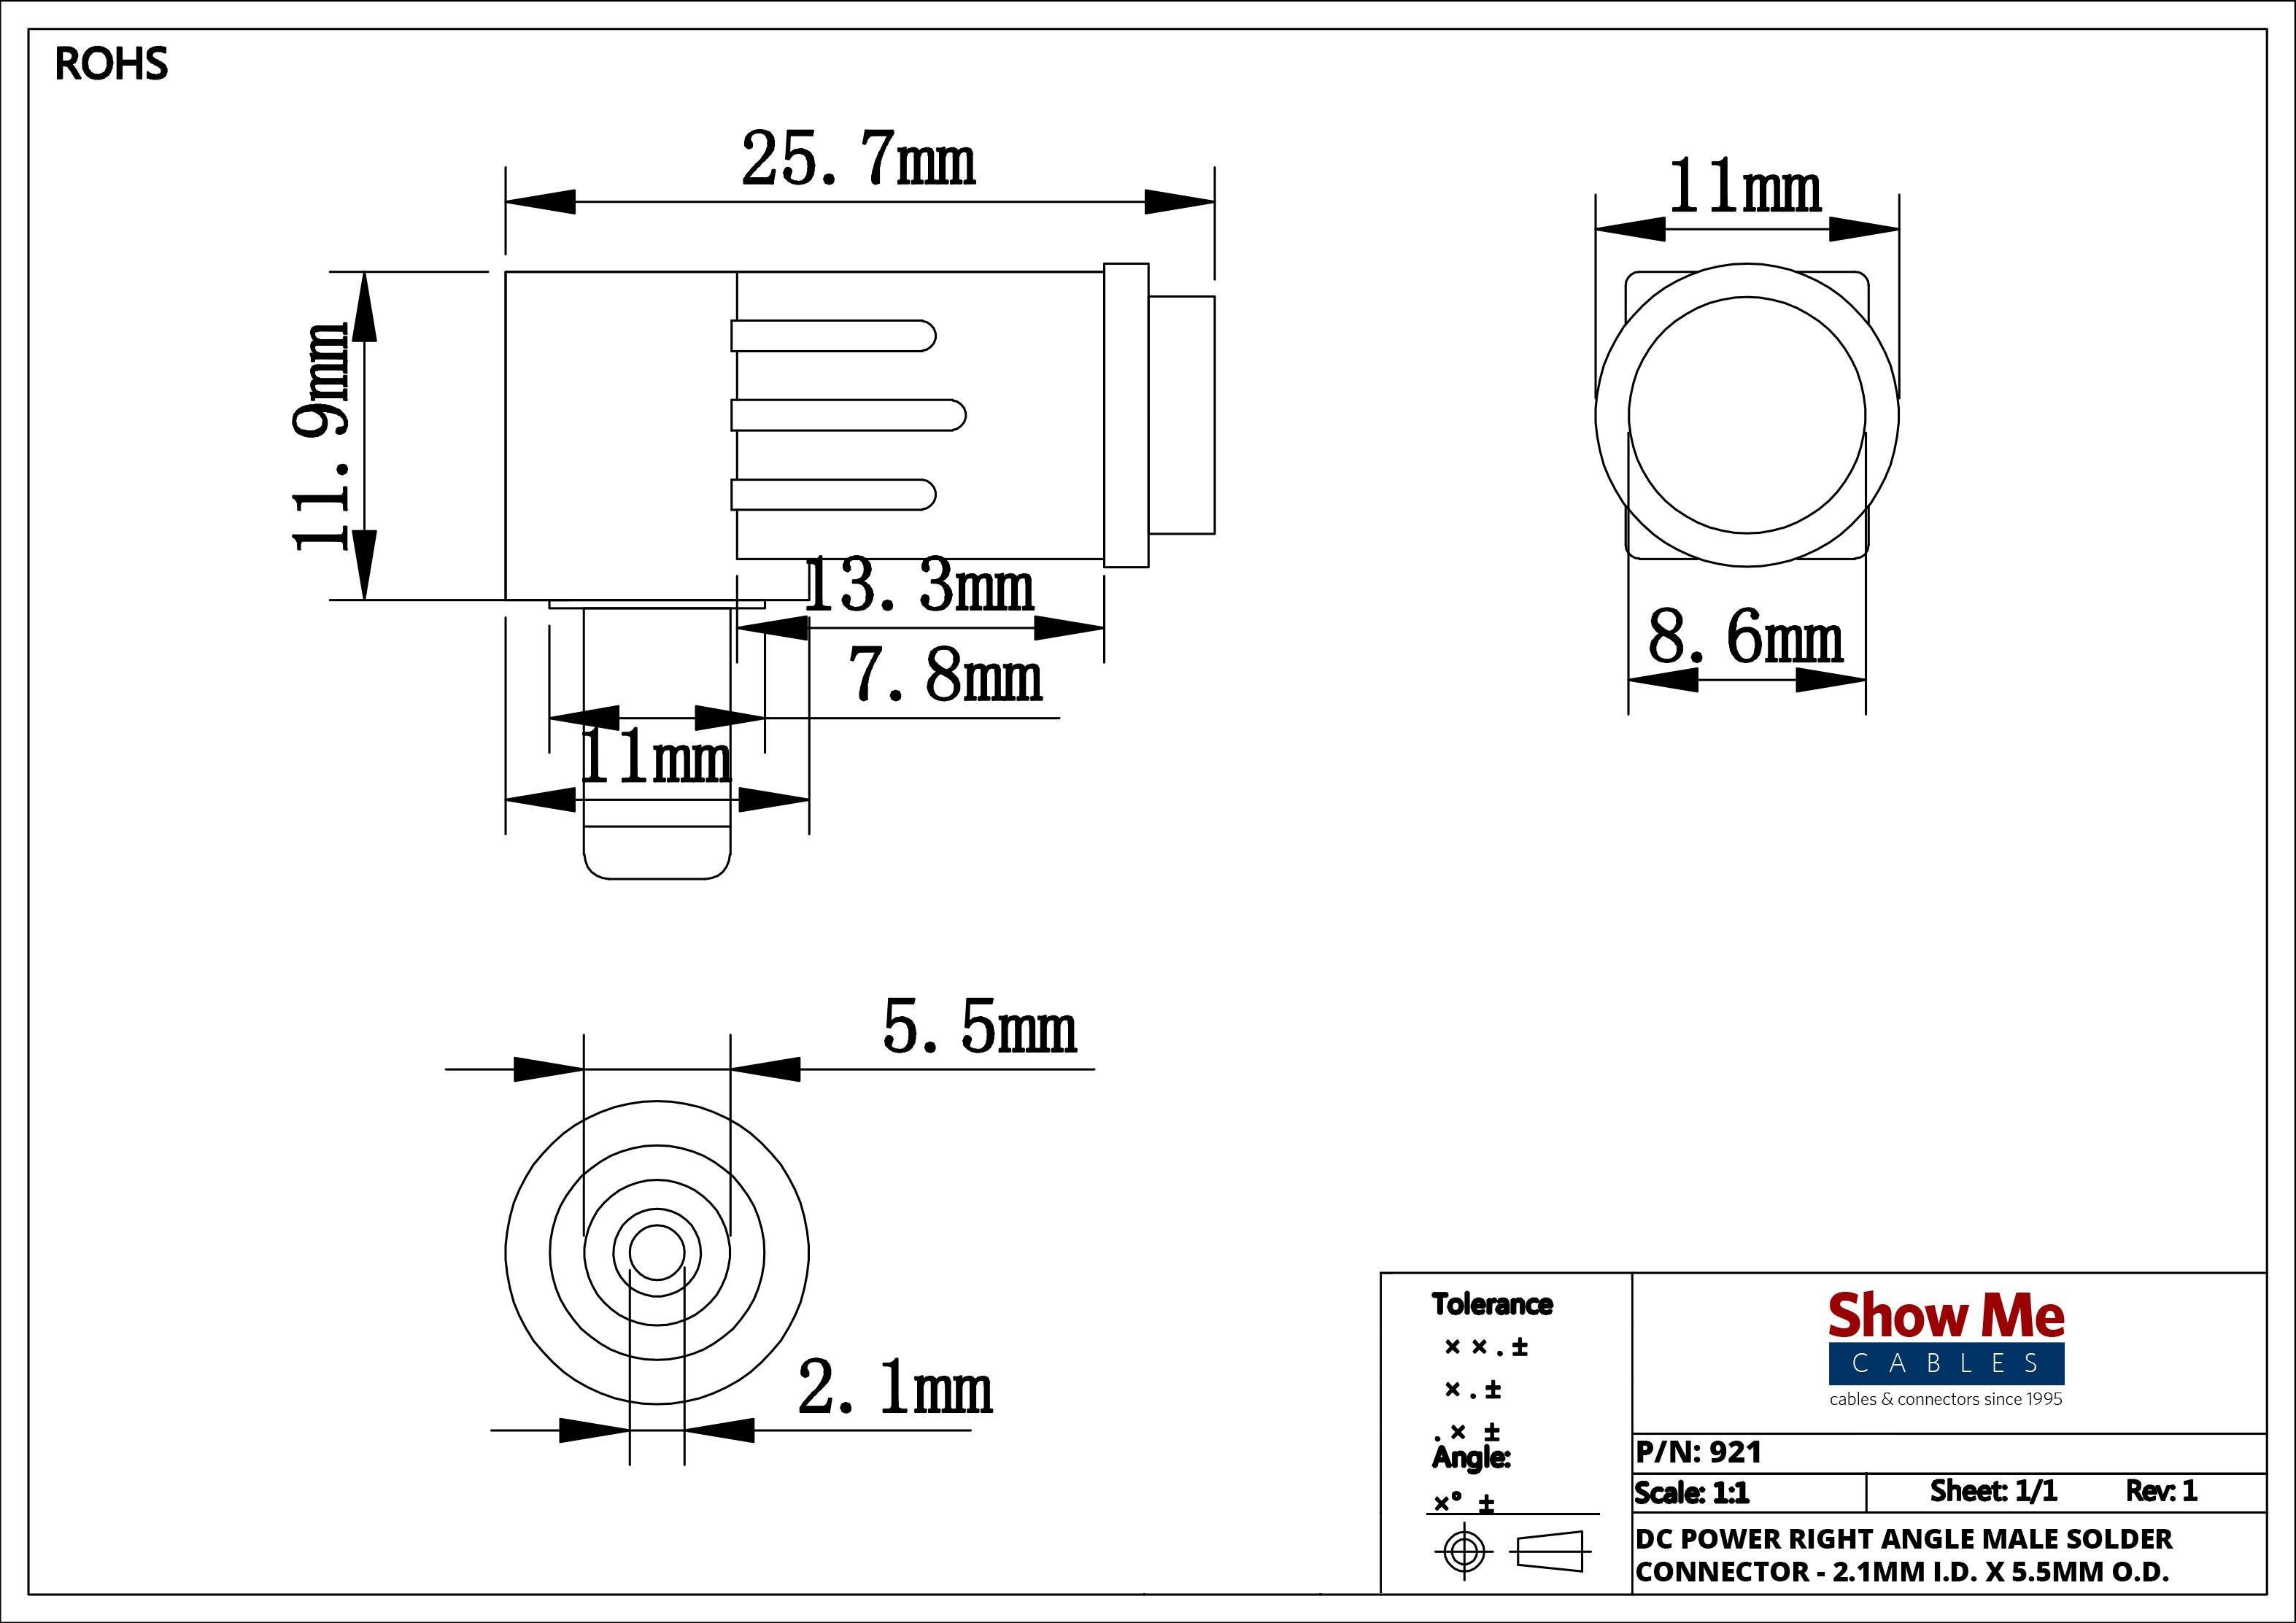 Wiring Diagram for Alarm Bell Box Inspirationa 25 Mm Jack Wiring Diagram Best 2 5mm Id